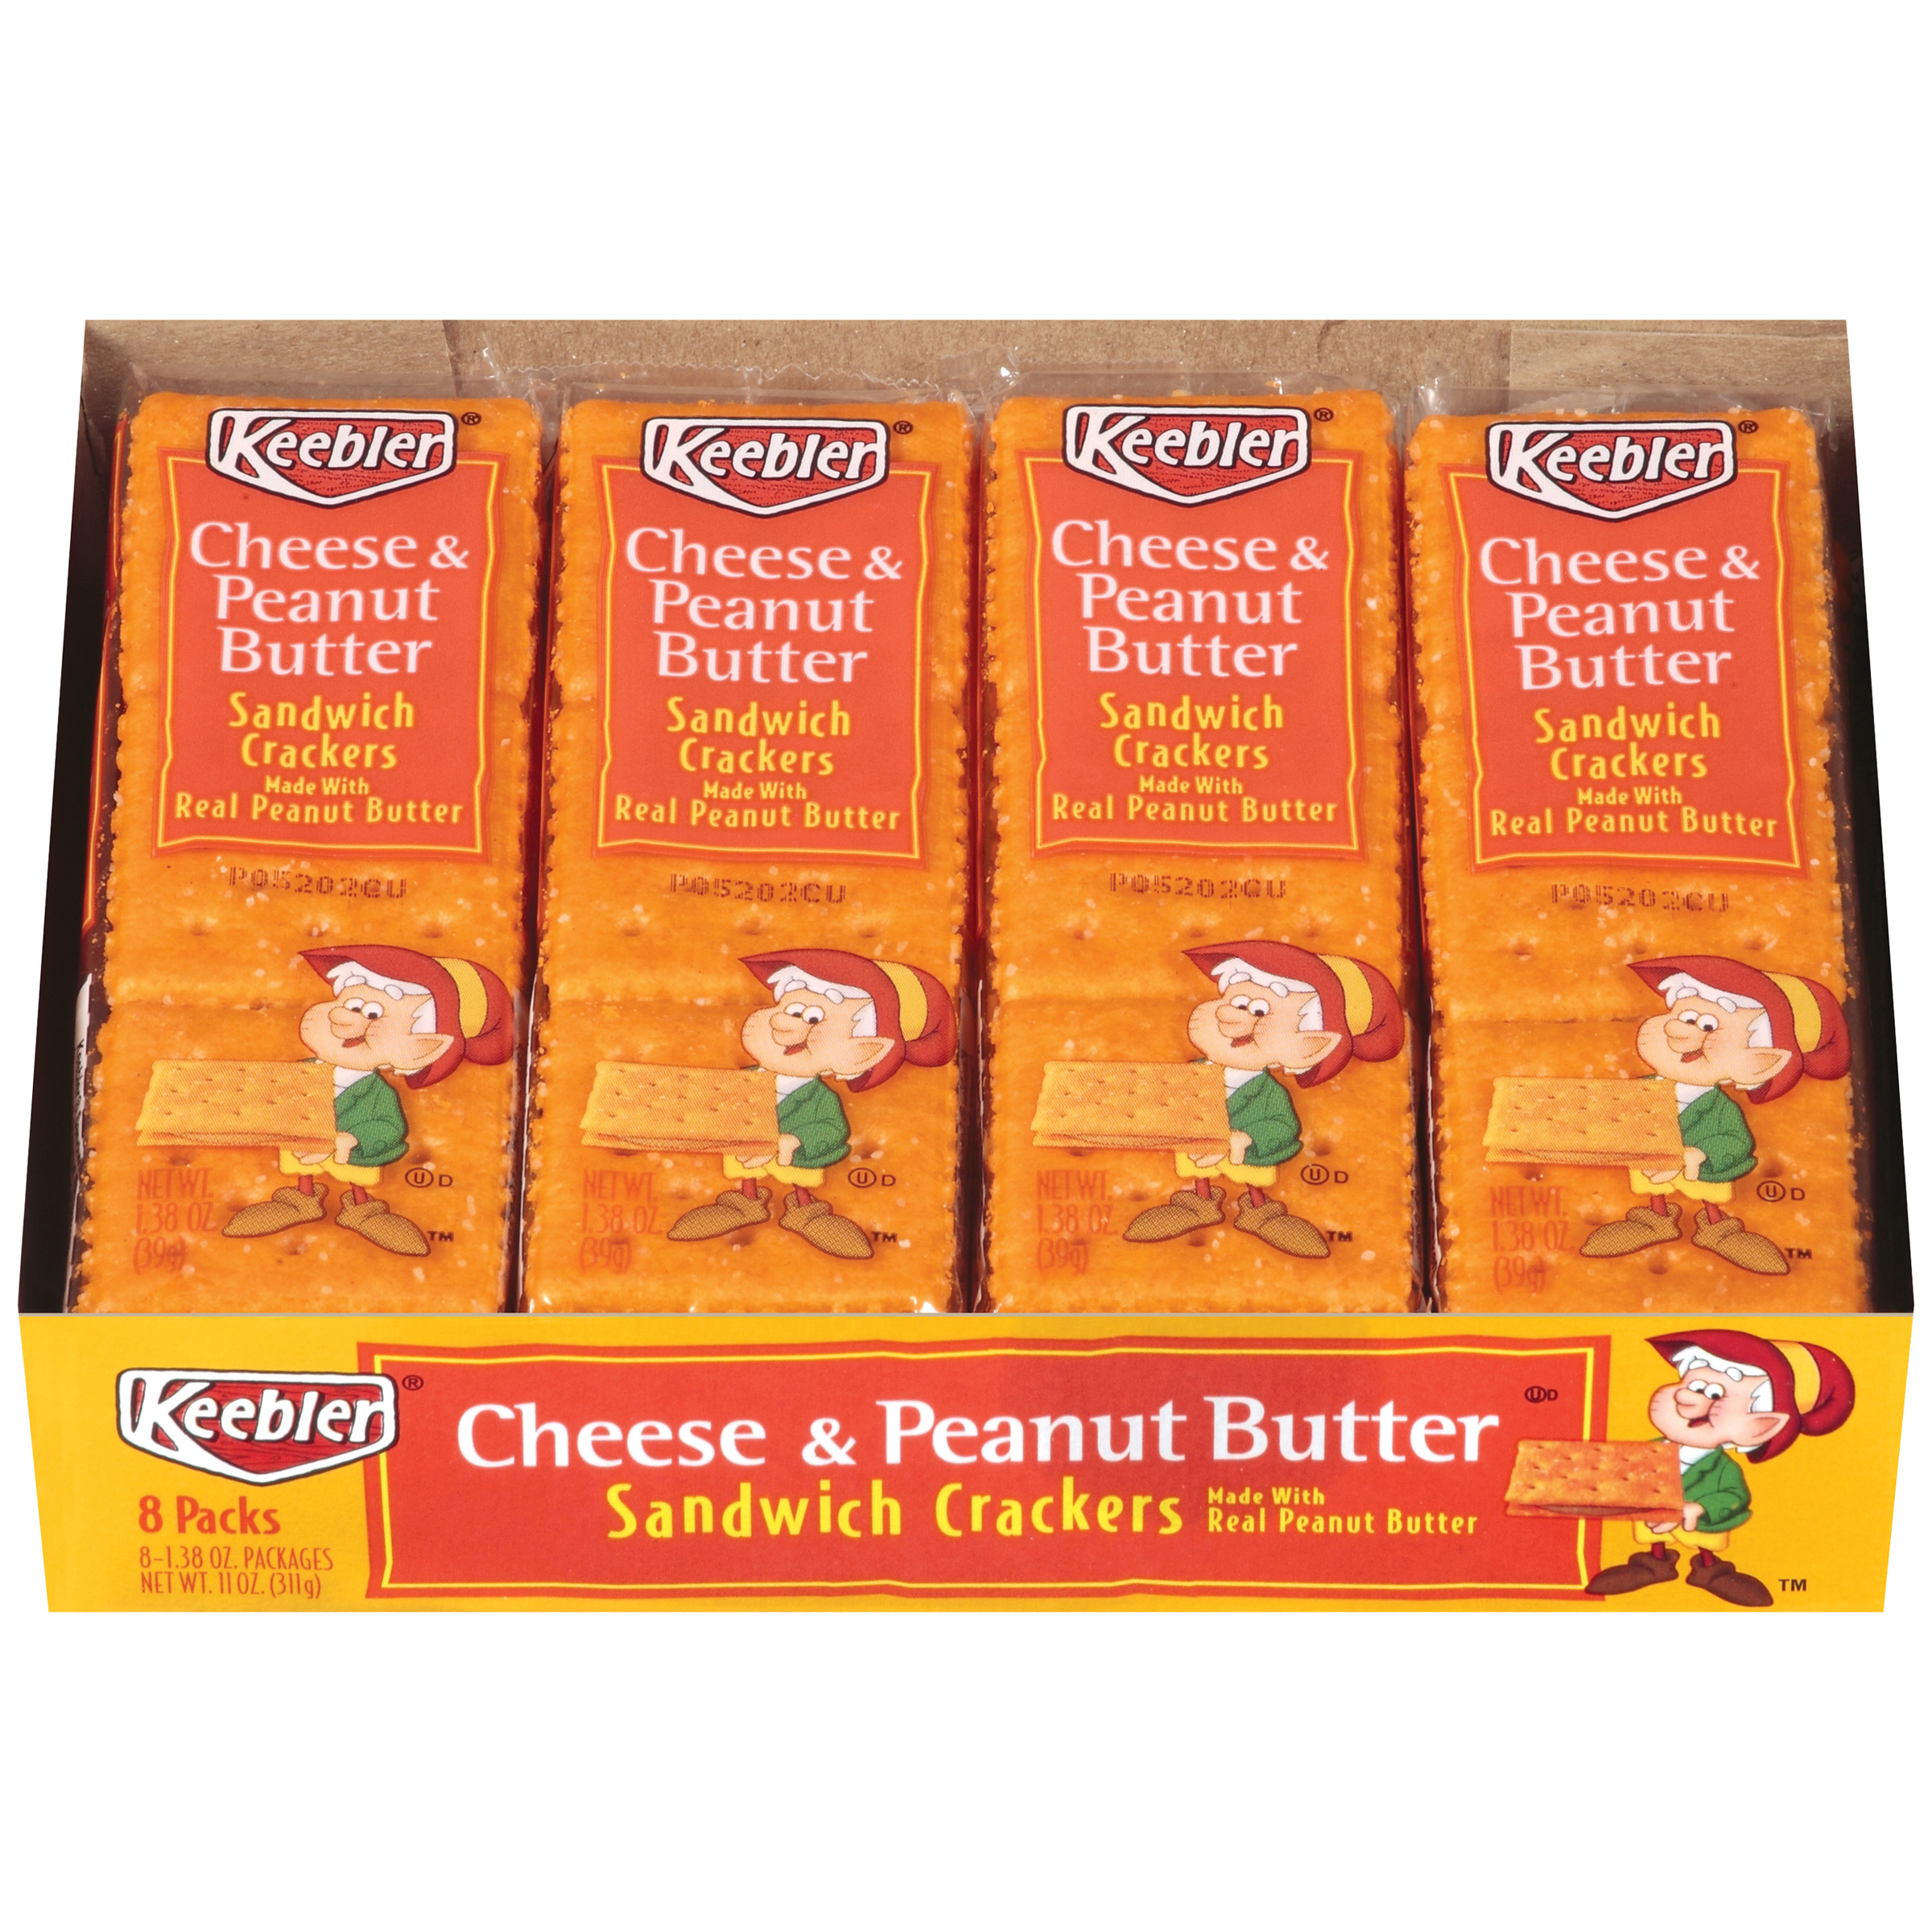 Keebler Cheese & Peanut Butter Sandwich Crackers - 8 CT Packaging Image